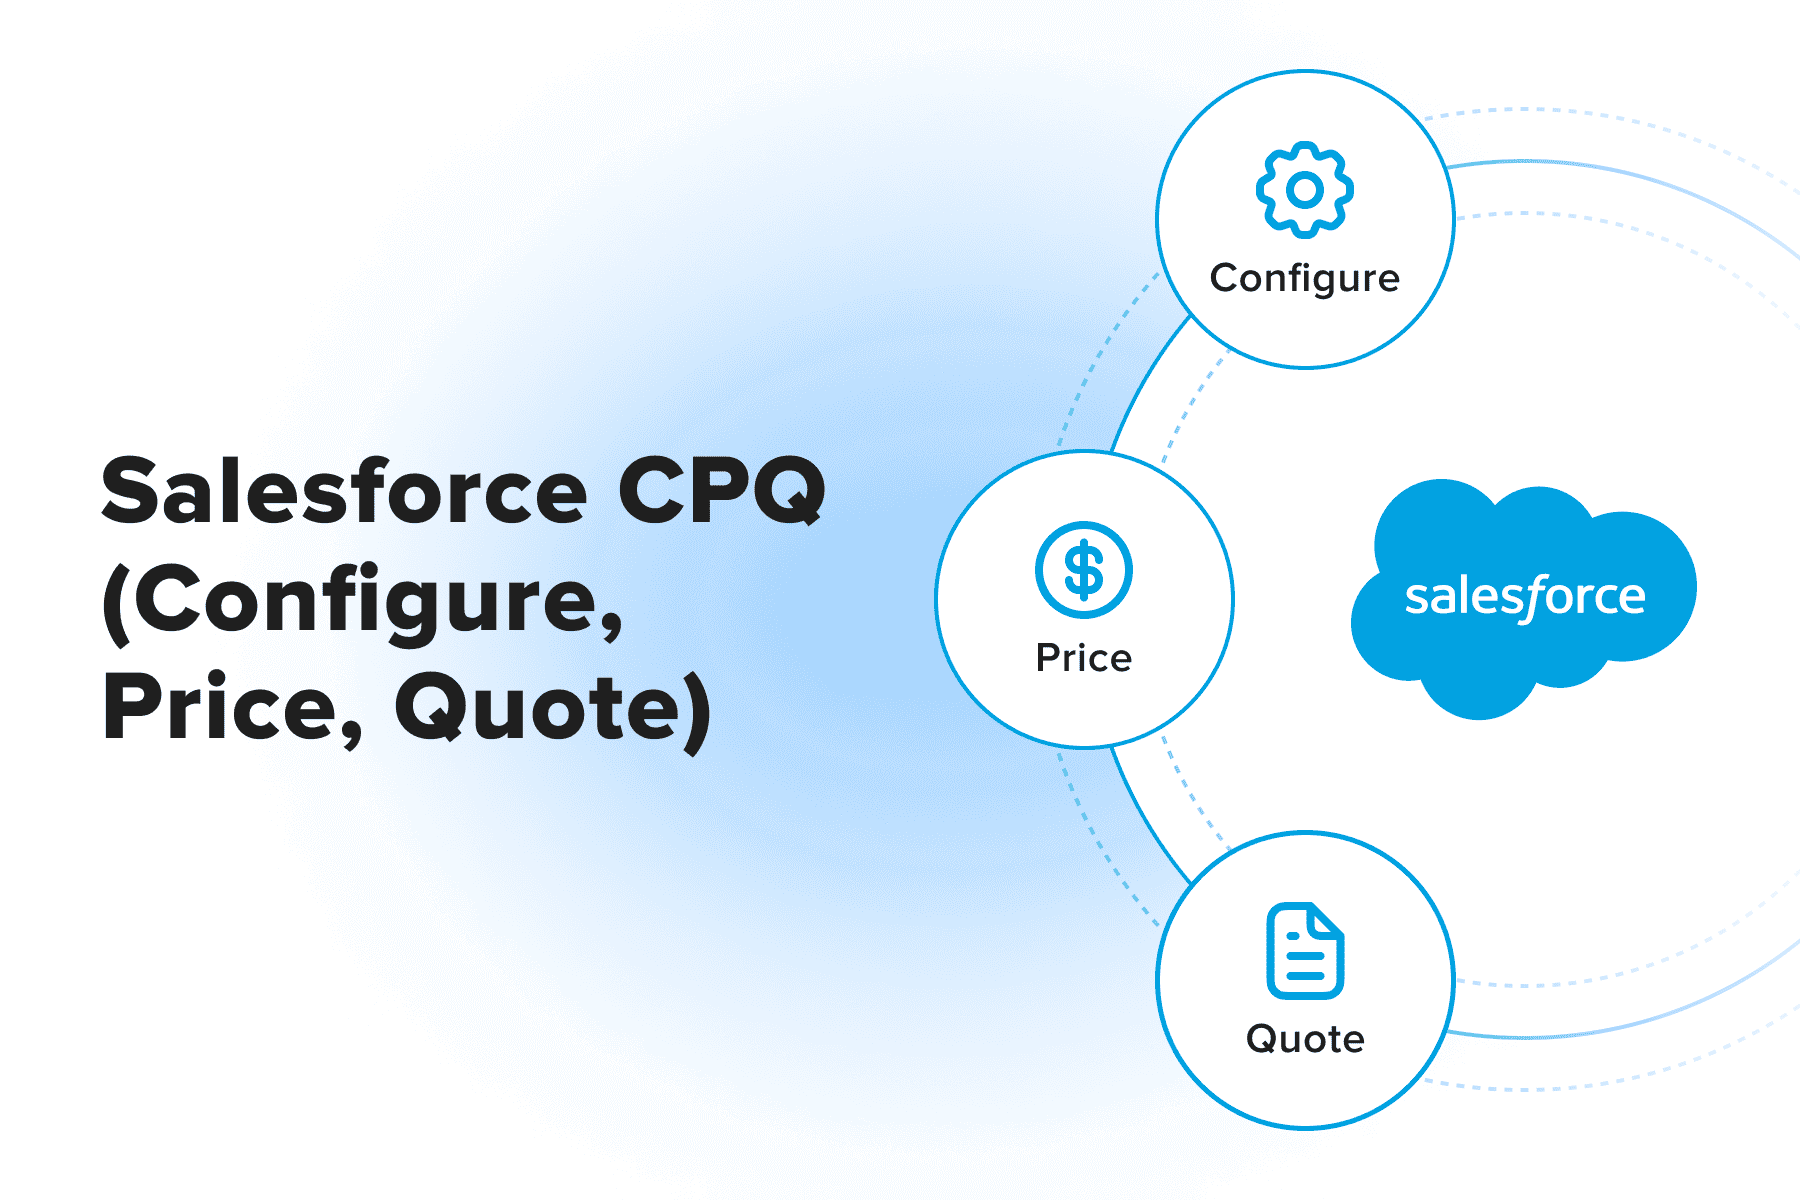 Salesforce CPQ (Configure, Price Quote): How Does It Work?